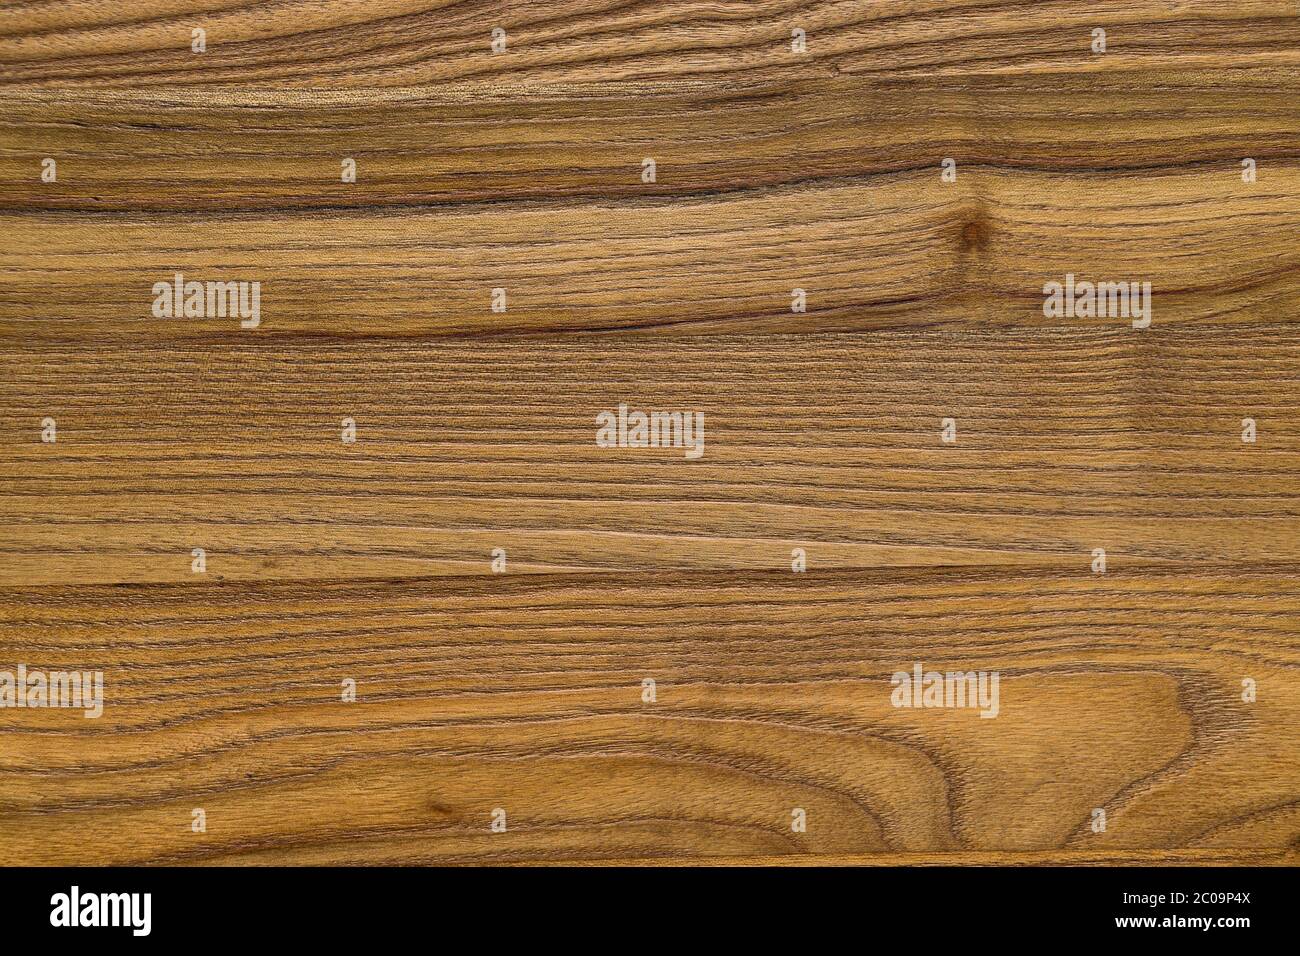 Closeup of wood grain fibers. The wood surface is colored with a natural medium light brown stain and the wood grain texture runs horizontally. Stock Photo